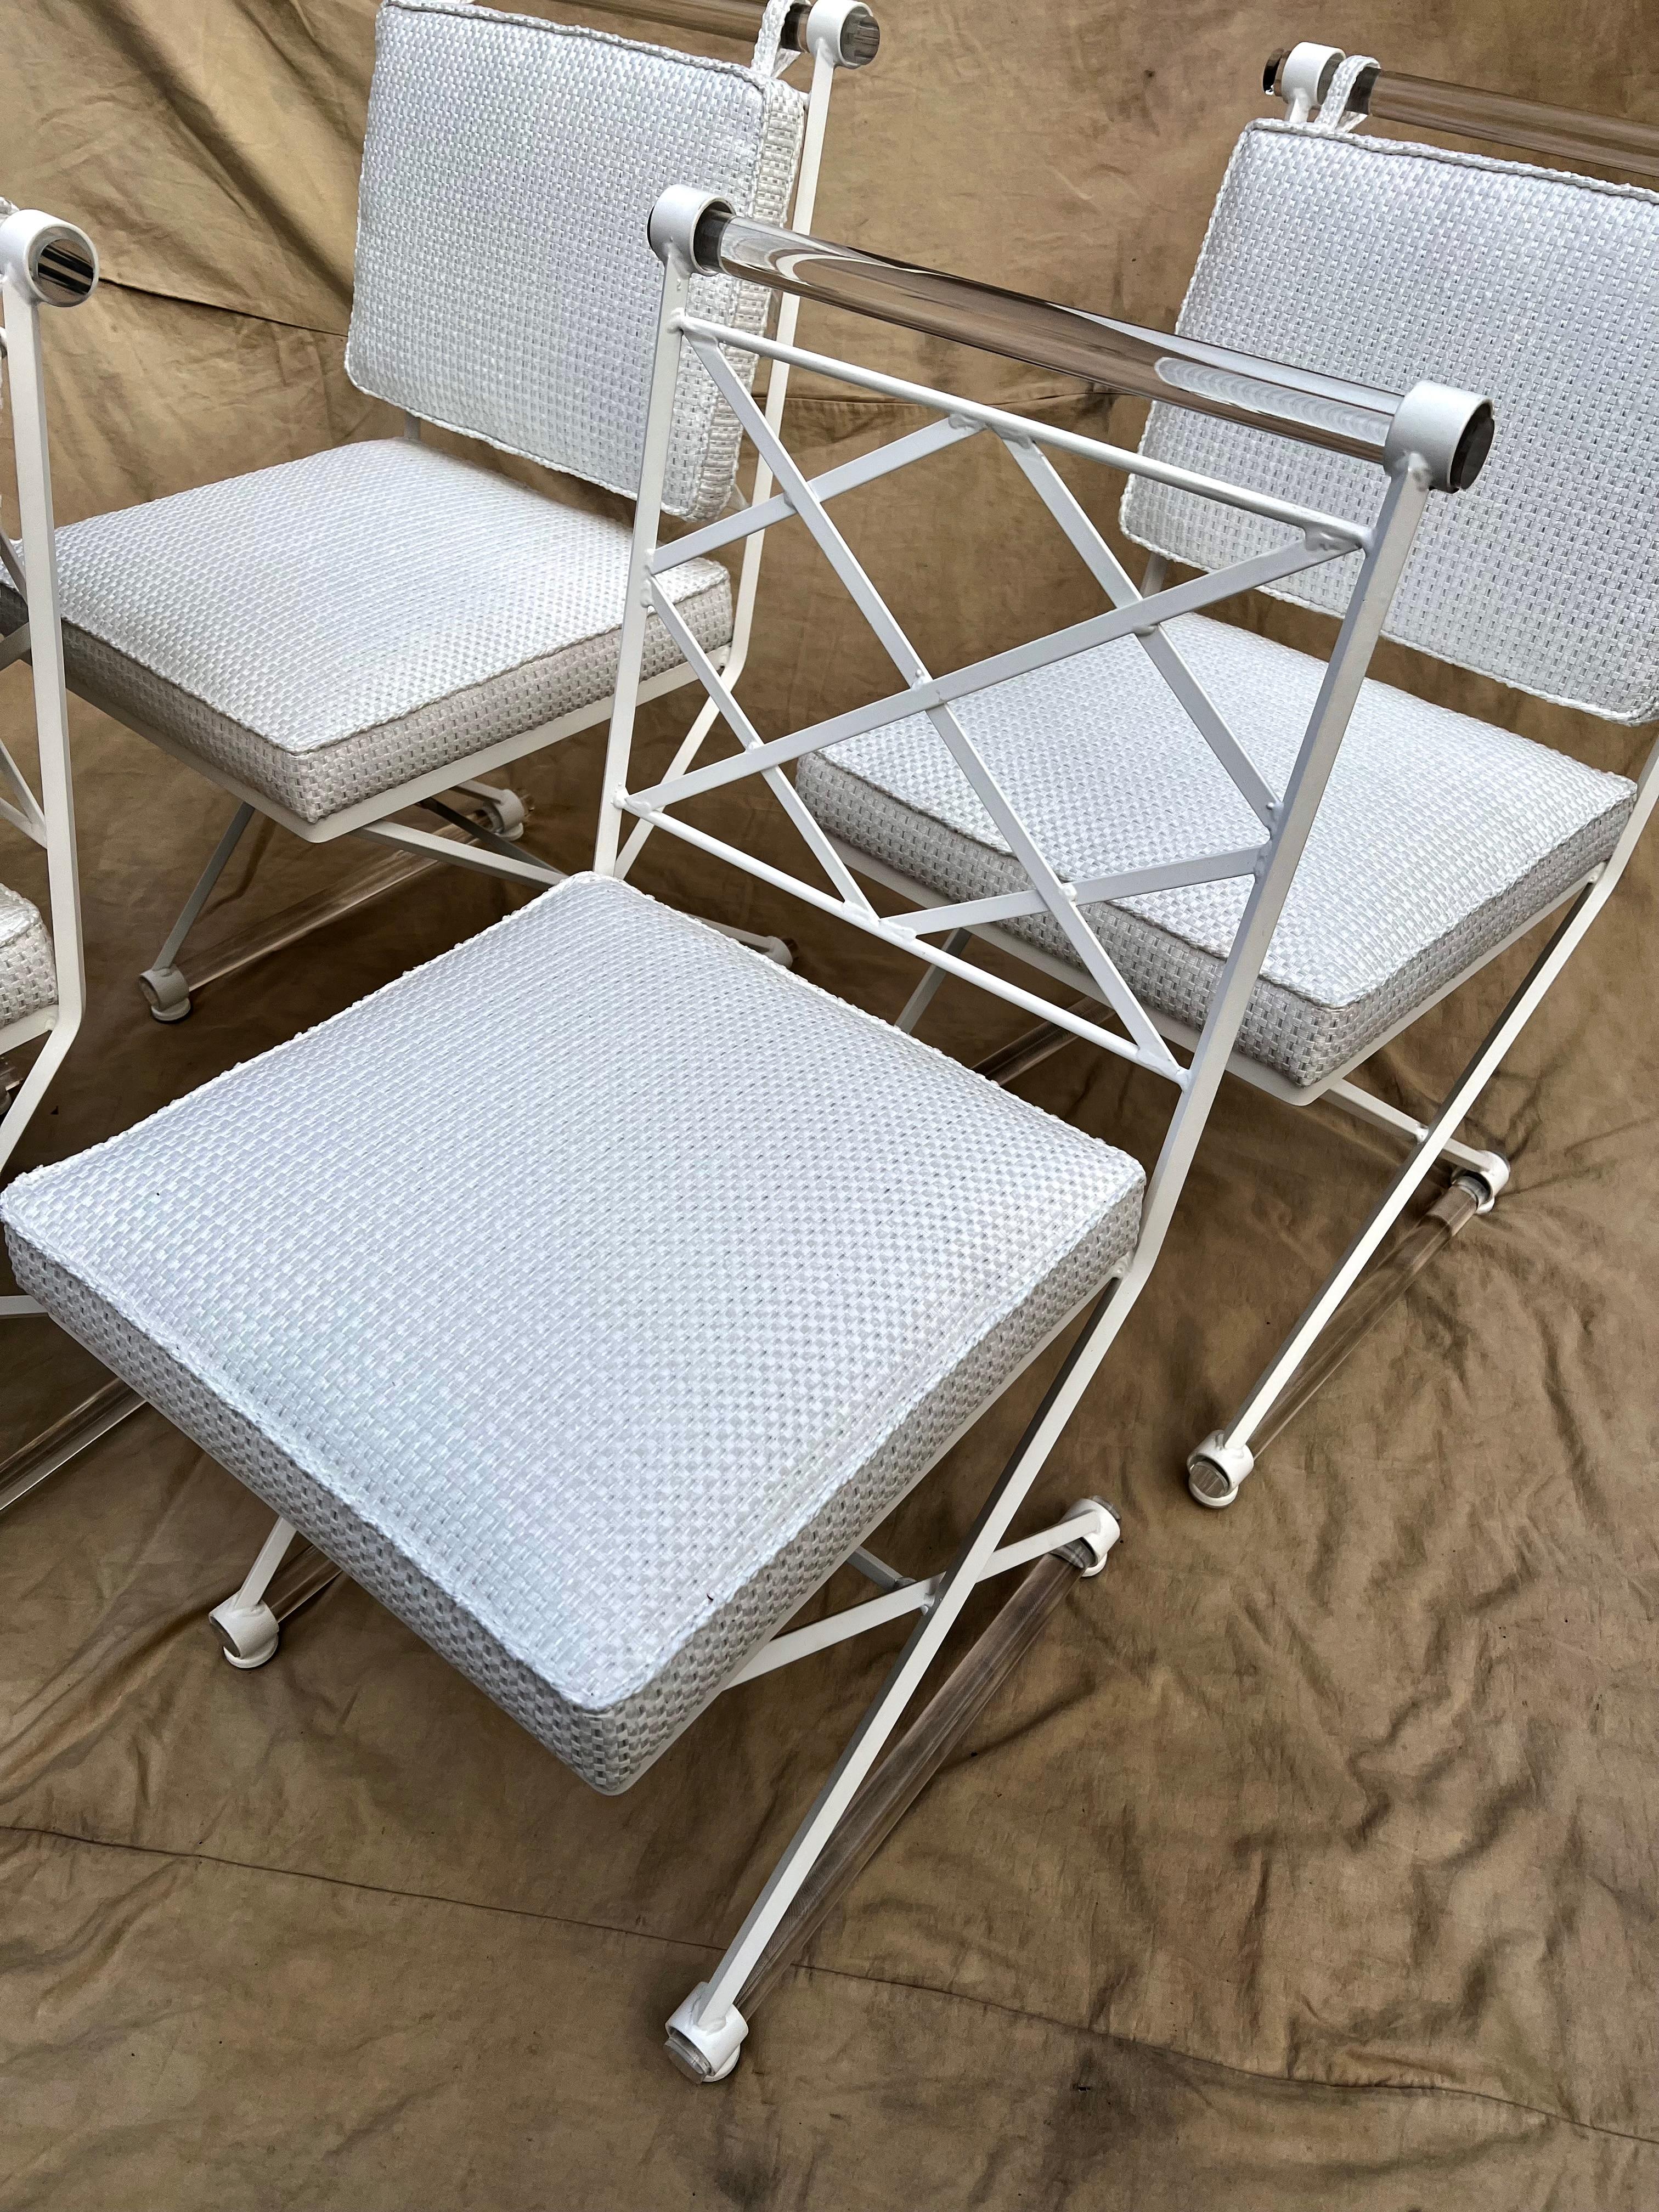 Cleo Baldon X-Form Chairs Restored with Acrylic Dowels and Sunbrella Upholstery For Sale 2